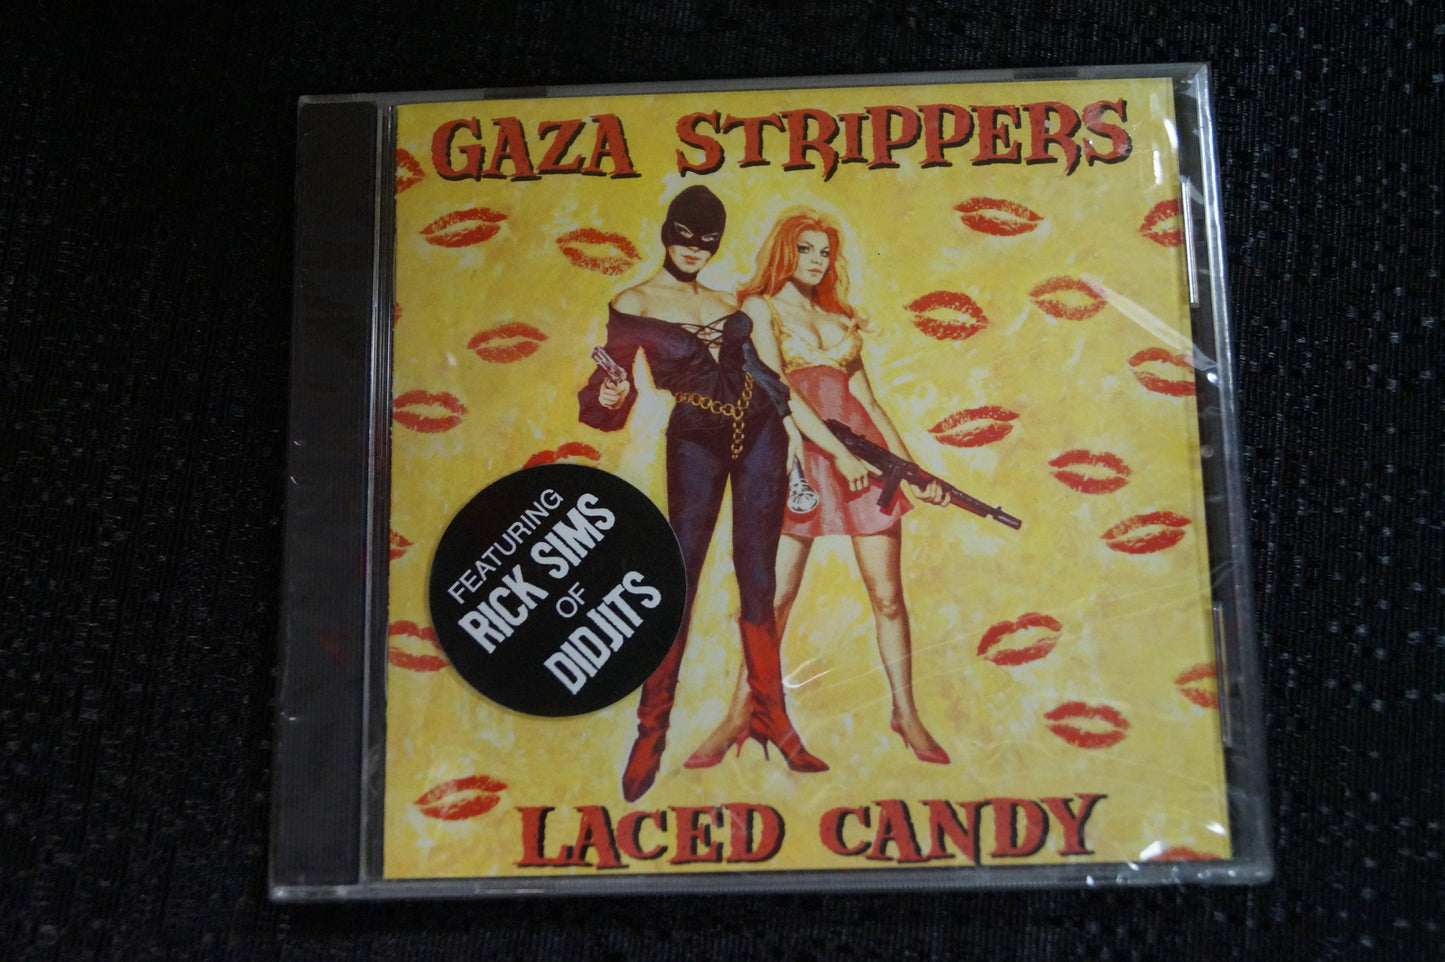 Gaza Strippers "Laced Candy" 1999 CD Art By Kozik